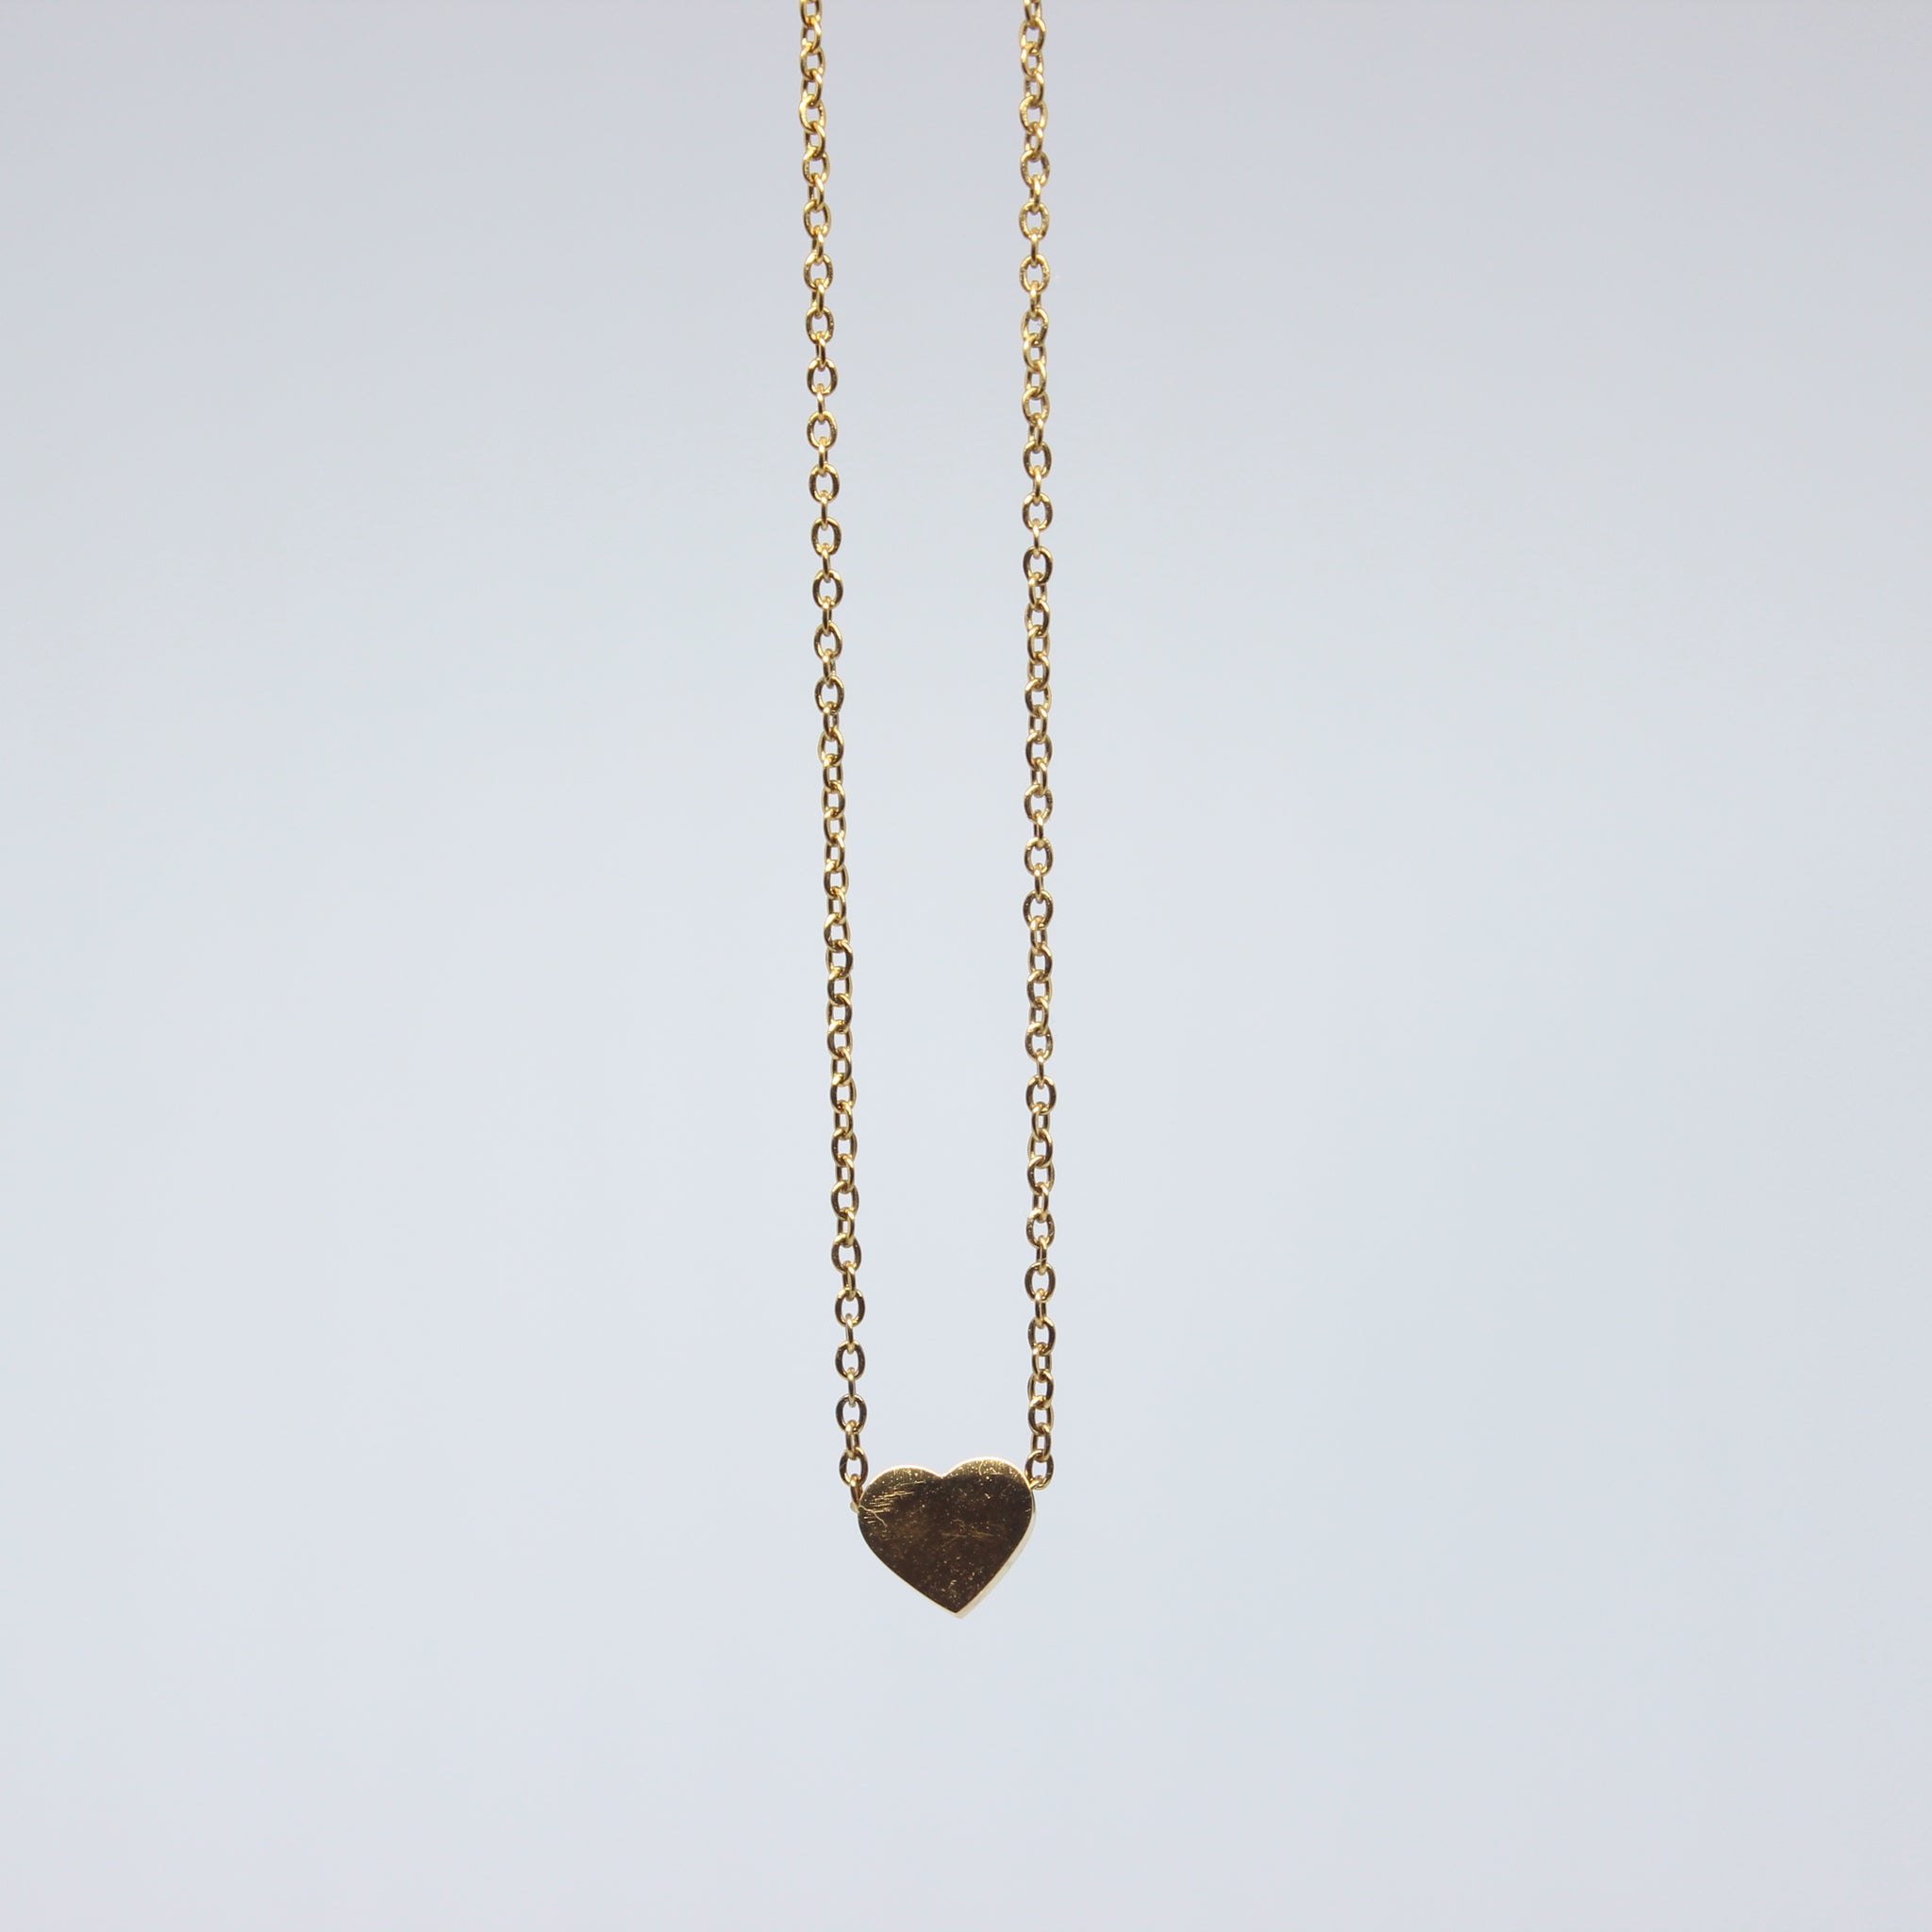 Stainless Steel Chain With Small Heart Pendant Gold